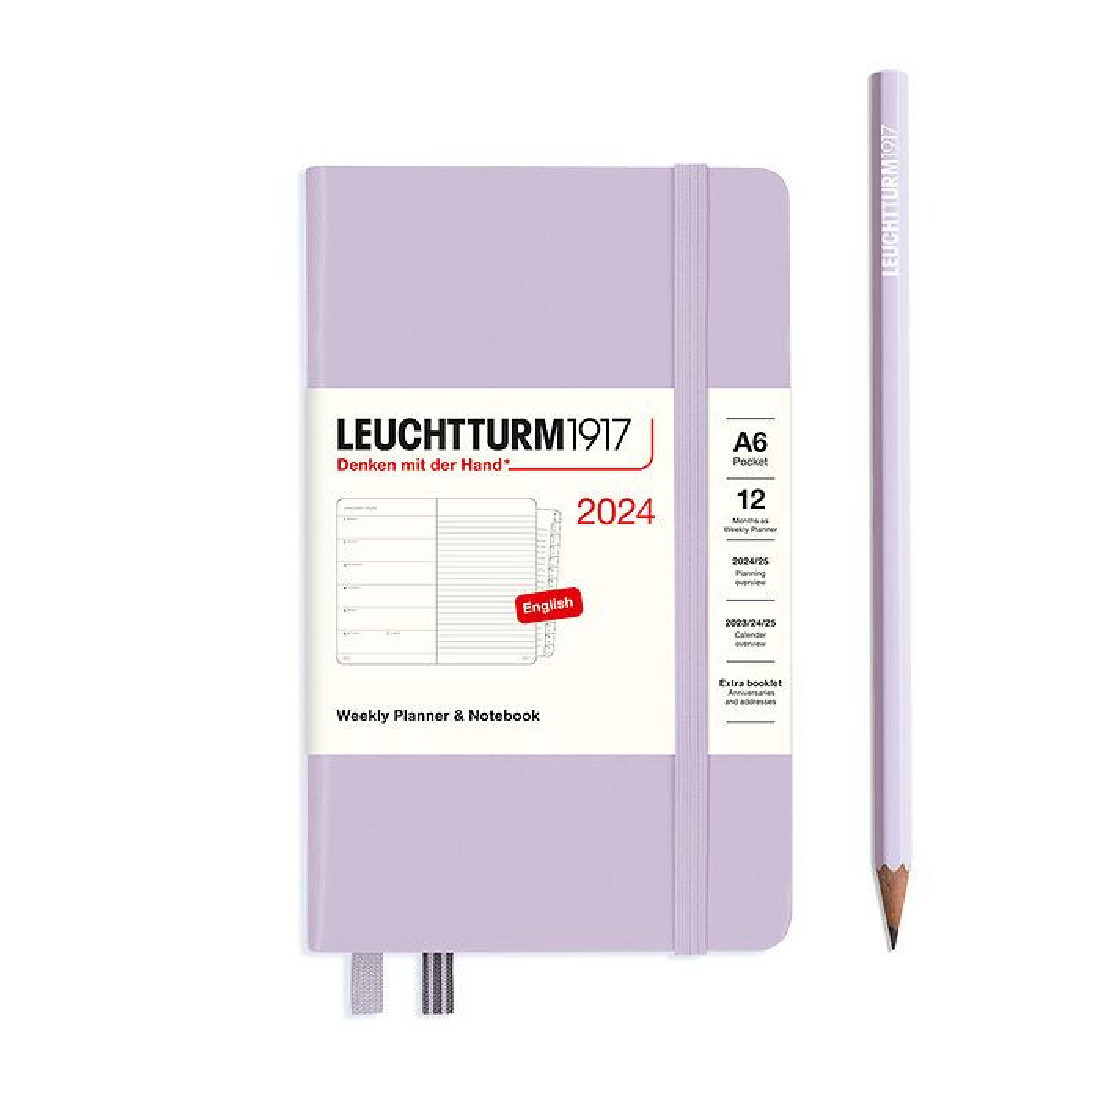 Leuchtturm 1917 Weekly Planner and Notebook 2024 Lilac Pocket A6 Hard Cover